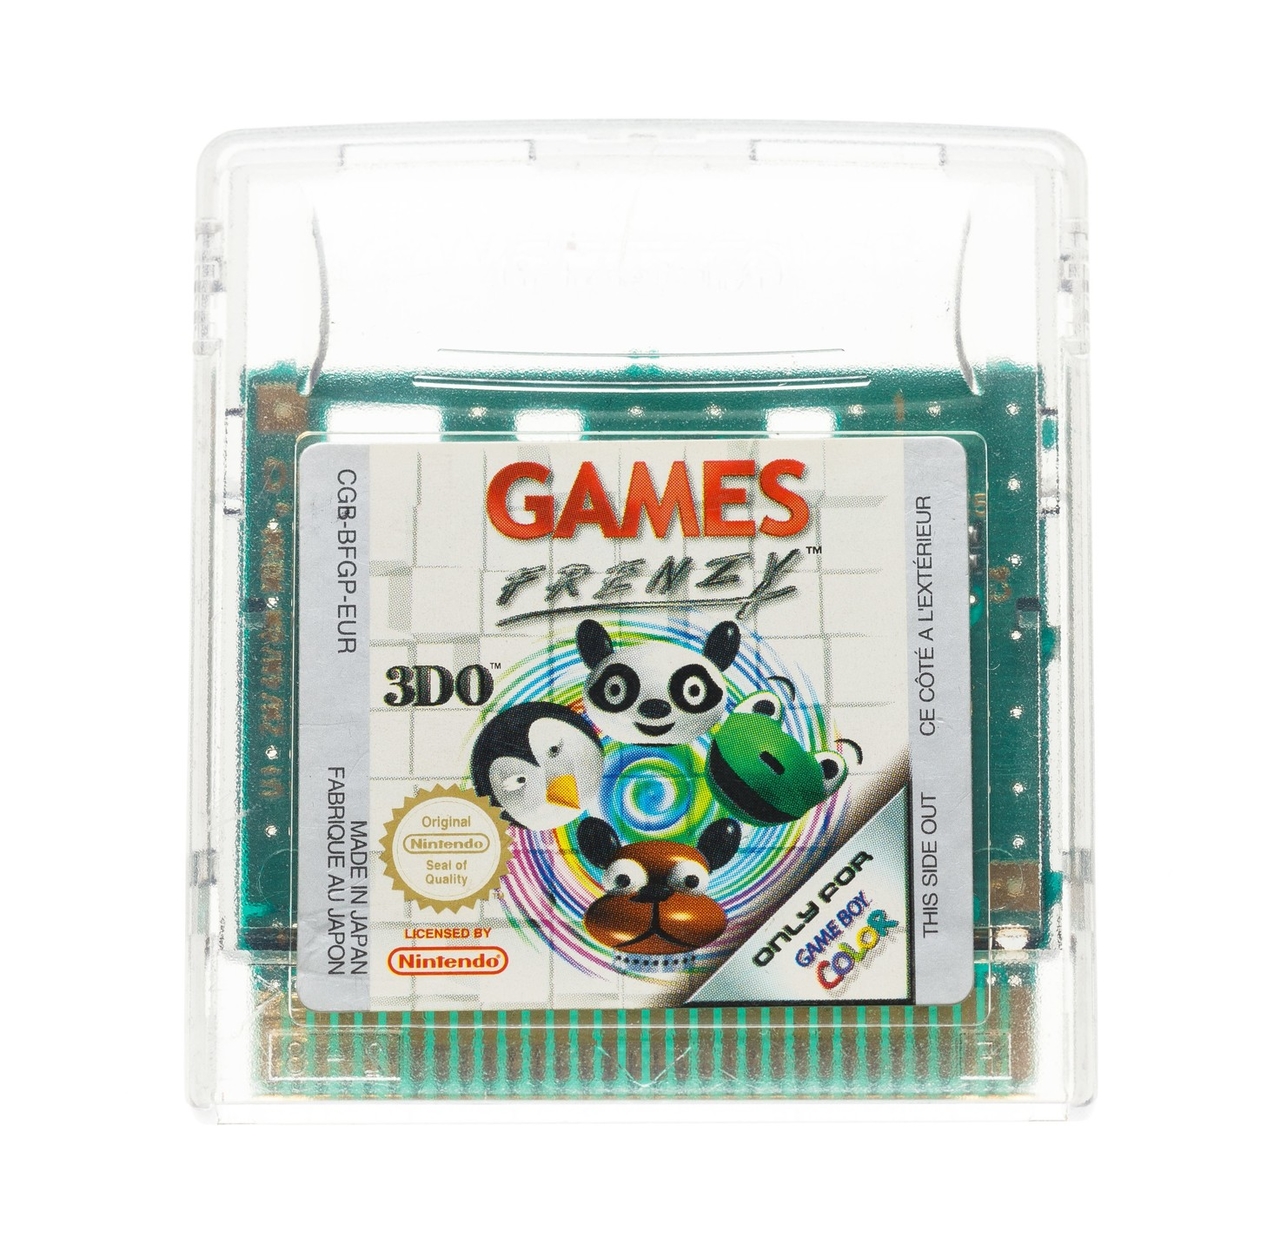 Games Frenzy - Gameboy Color Games